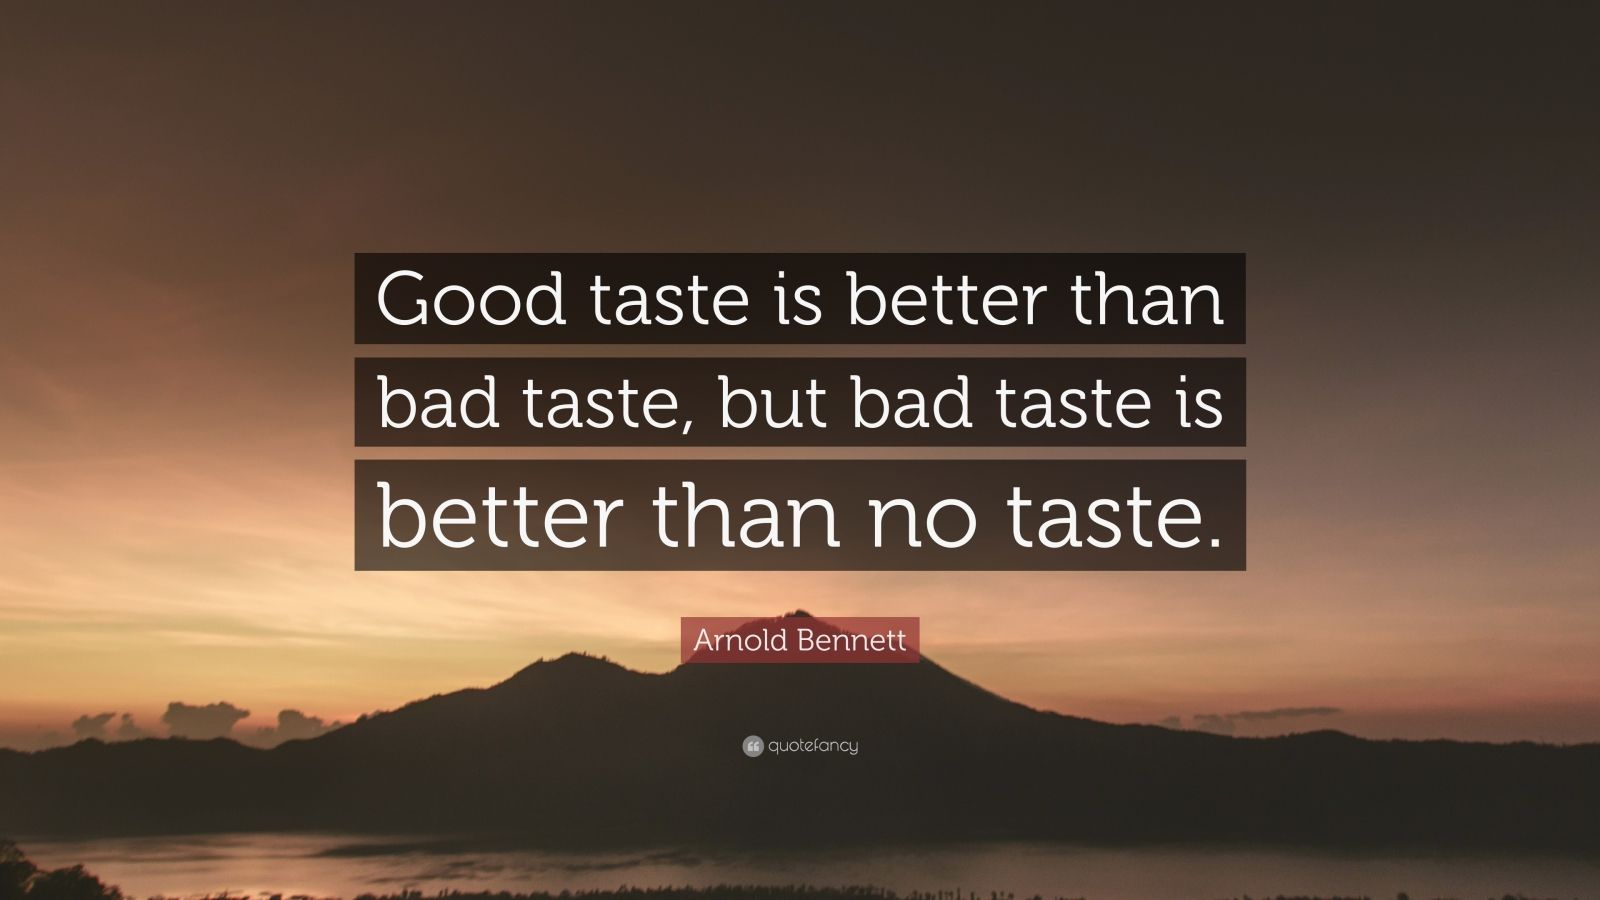 life is good than bad quote